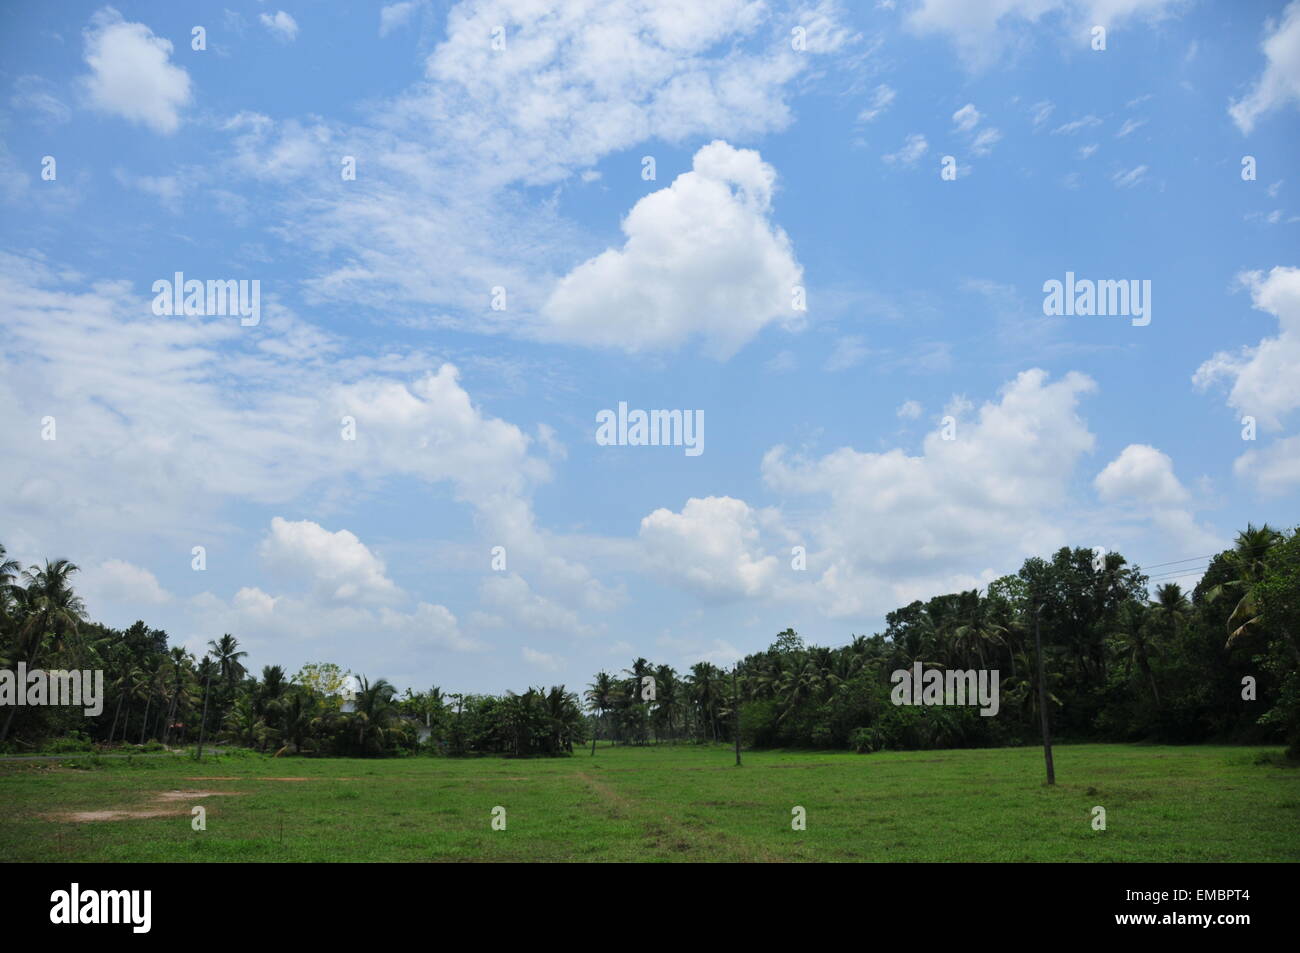 A wide view of a blue sky and a green field. Stock Photo